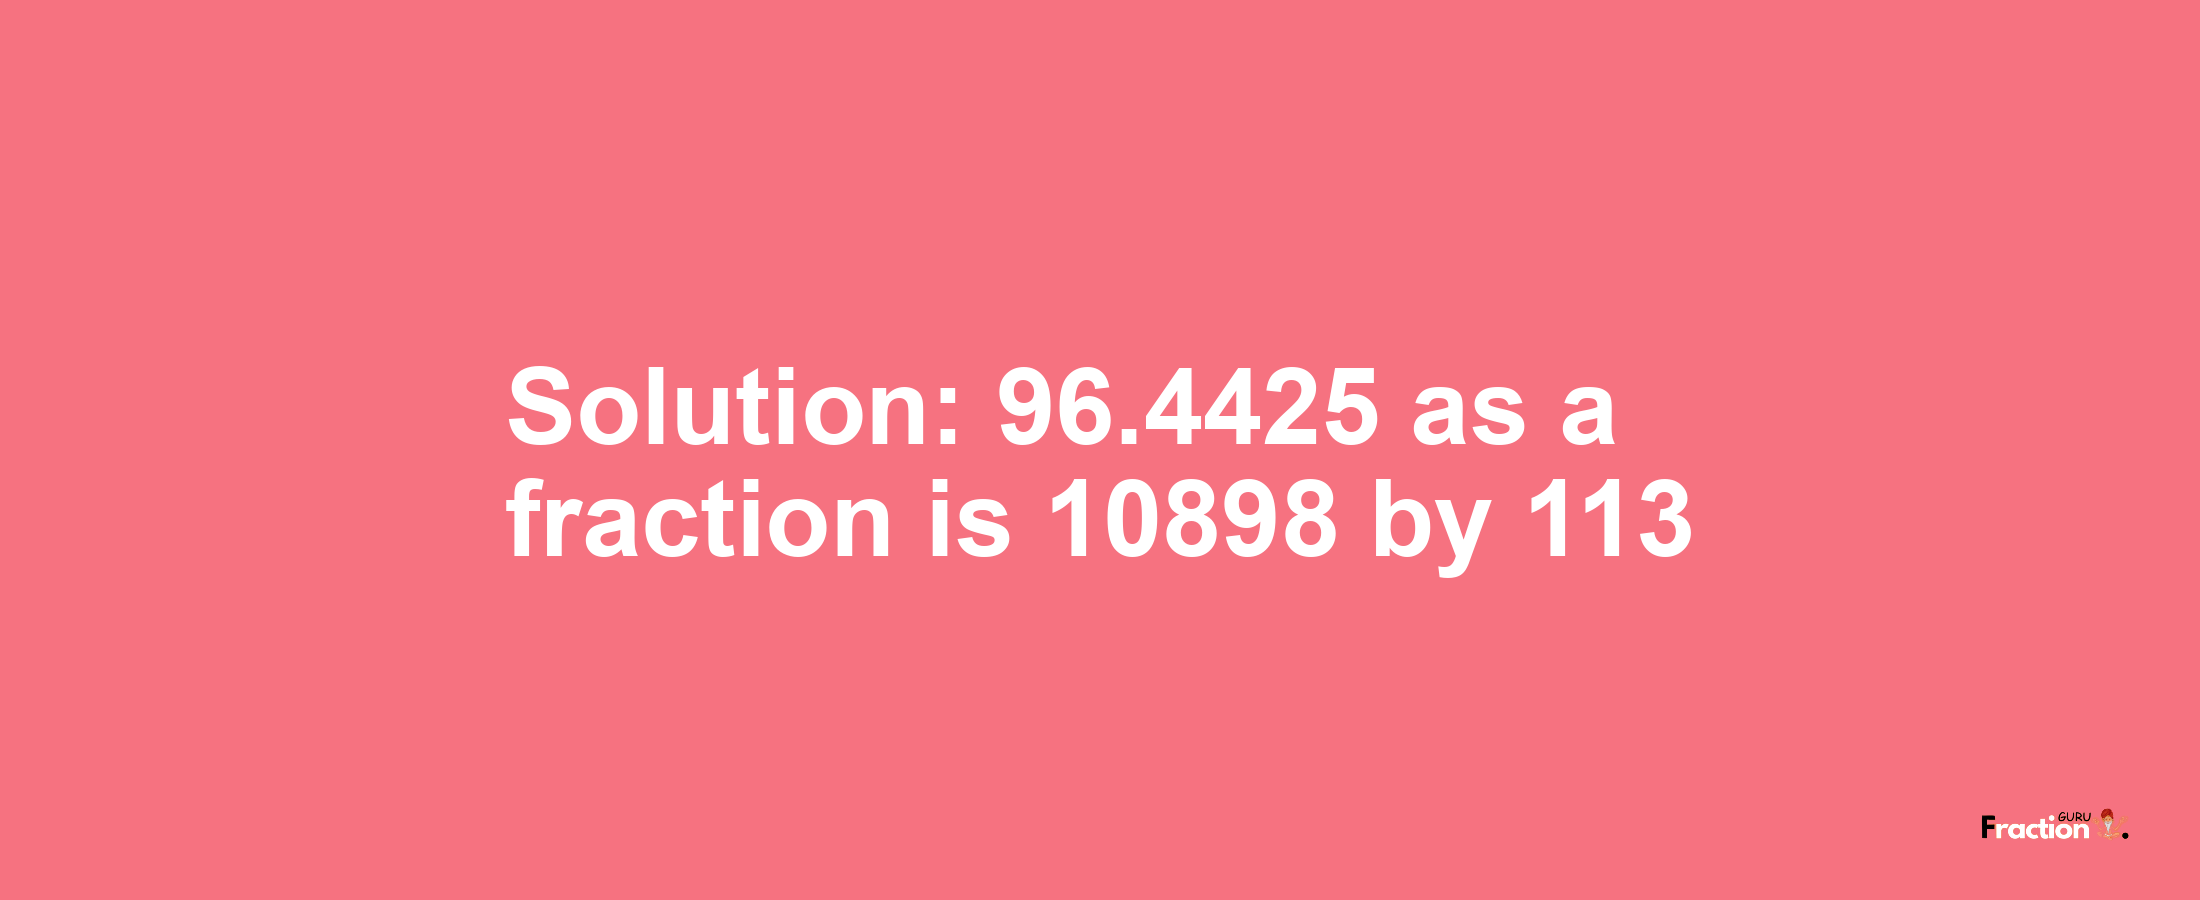 Solution:96.4425 as a fraction is 10898/113